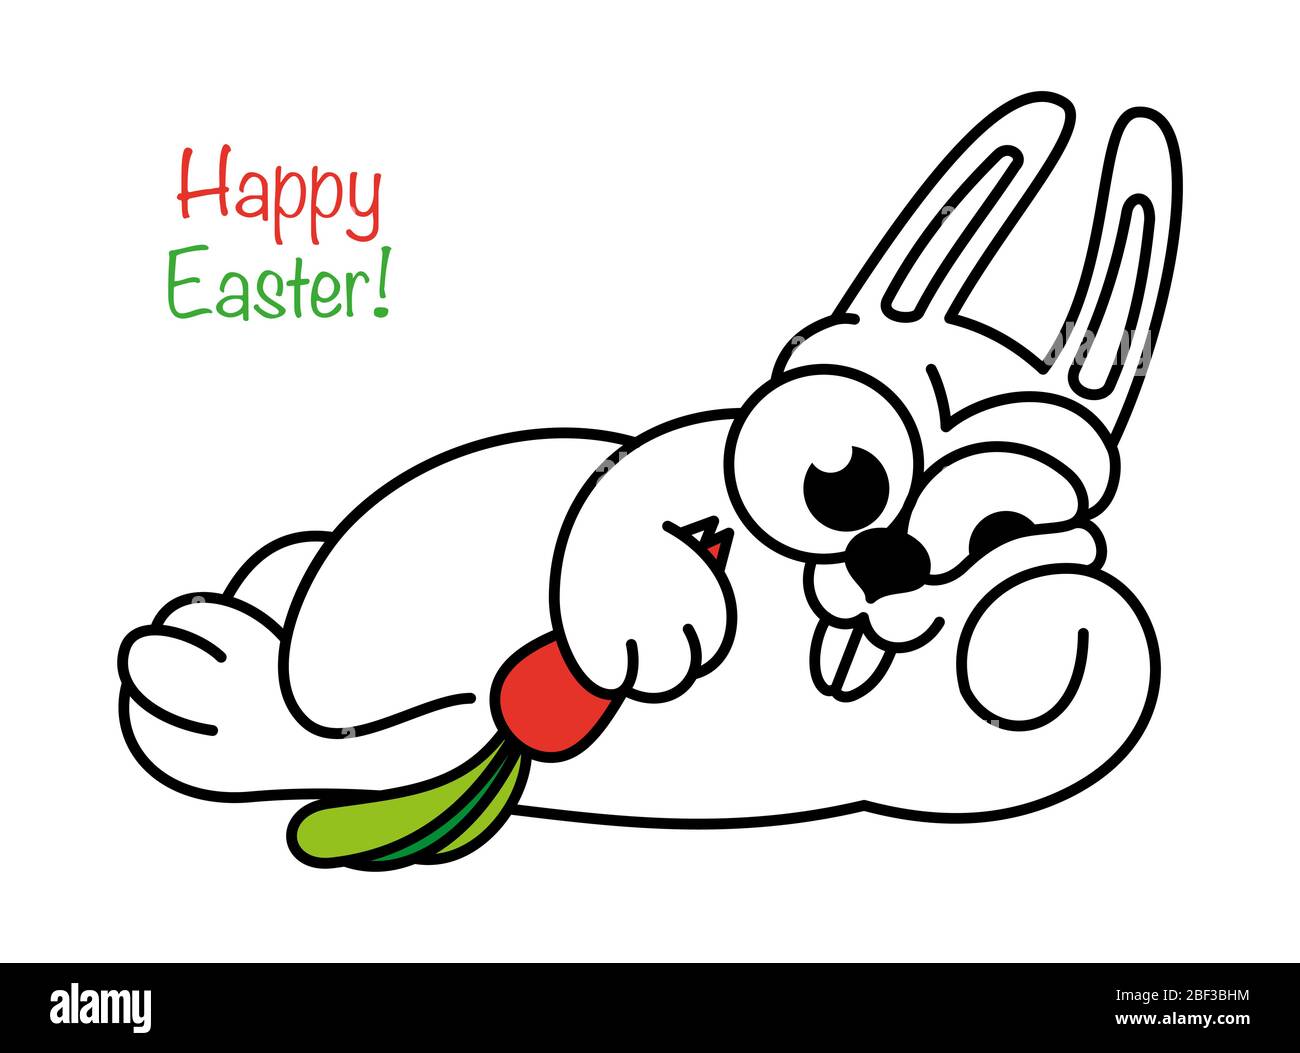 cartoon rabbit is lying and eating a carrot. Contour design of an easter bunny. Symbol for web sites on a white background. Isolated object Stock Vector